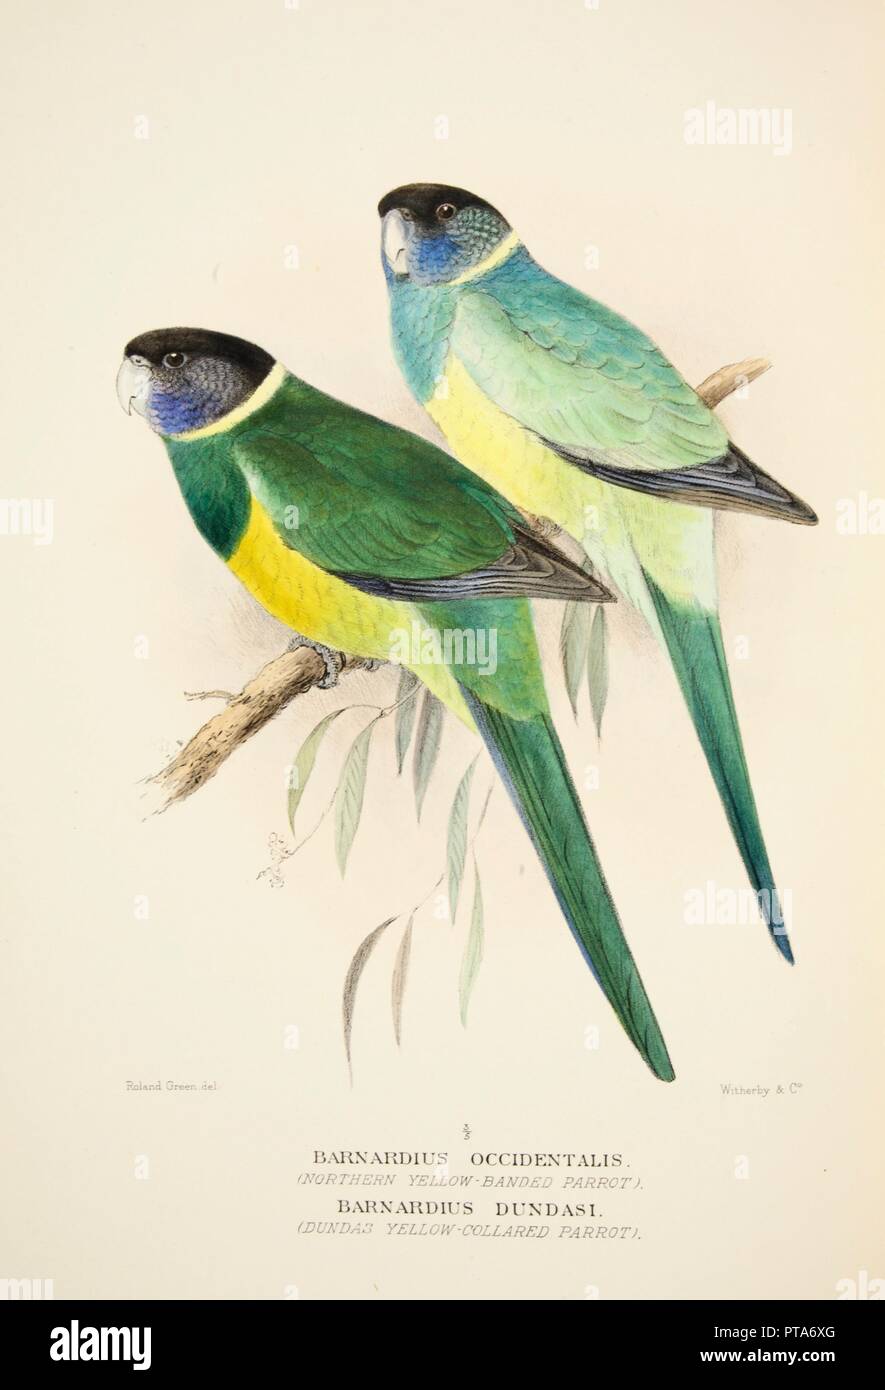 Northern Yellow Banded Parrot and Dundas Yellow Collared Parrot, pub. 1916 (hand coloured engraving) Creator: Roland Green (1896 - 1972). Stock Photo